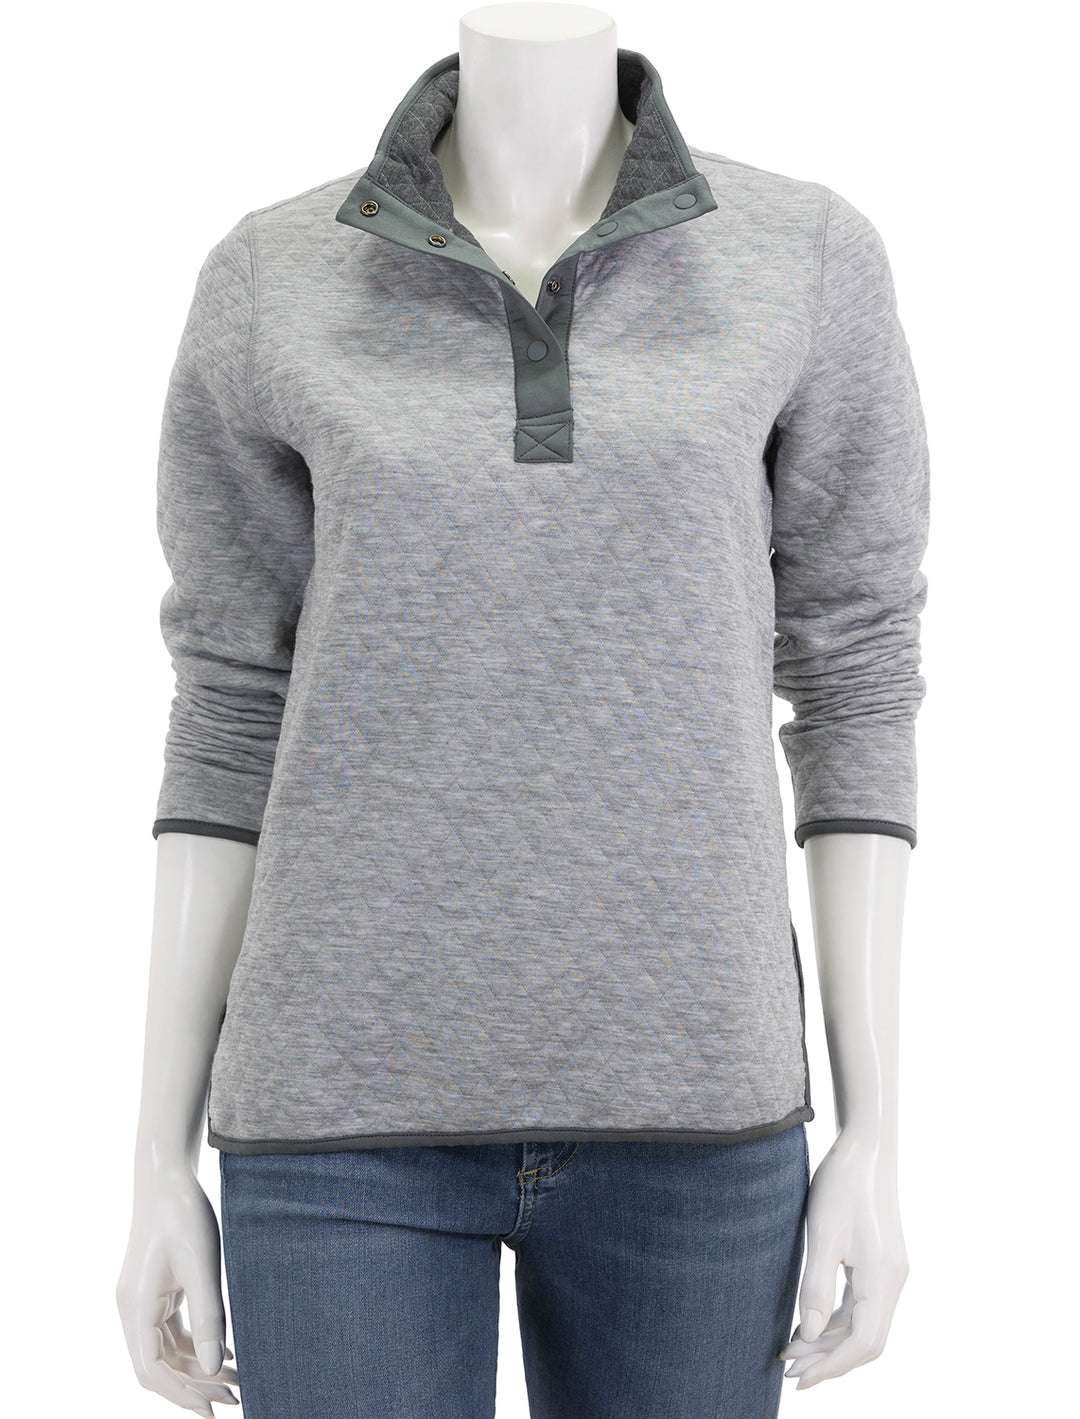 Model wearing Marine Layer's reversible corbet pullover in charcoal and heather grey.